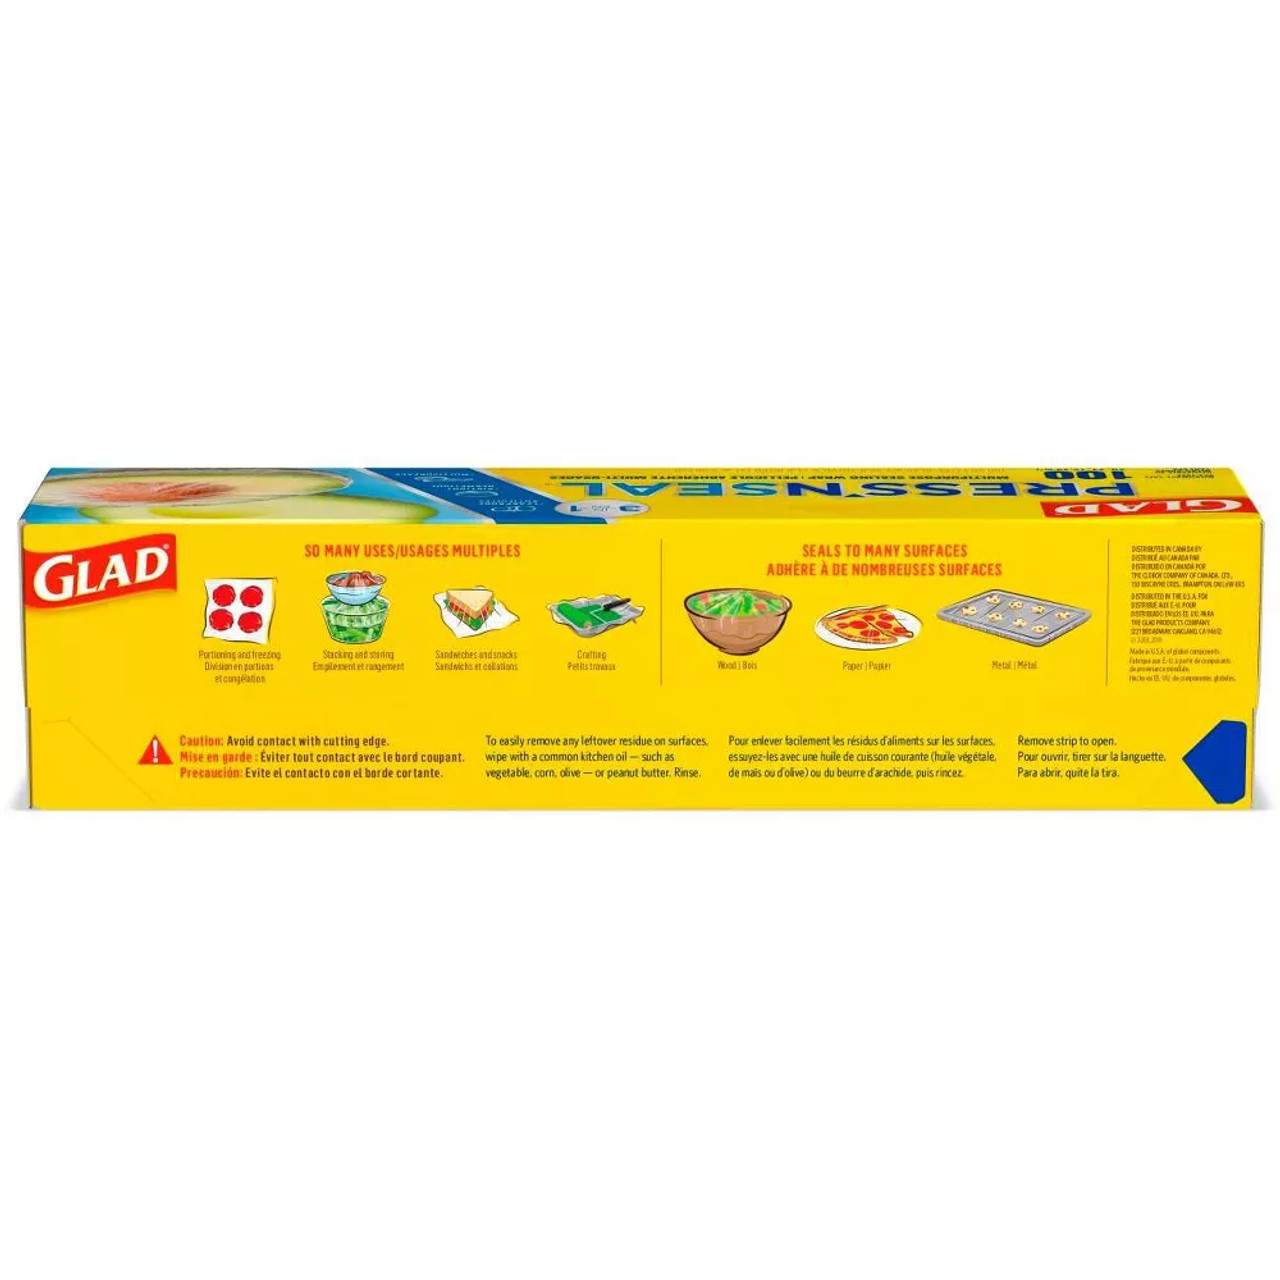 Glad Press'n Seal Plastic Food Wrap - 100 Square Foot Roll ( 3 Count )